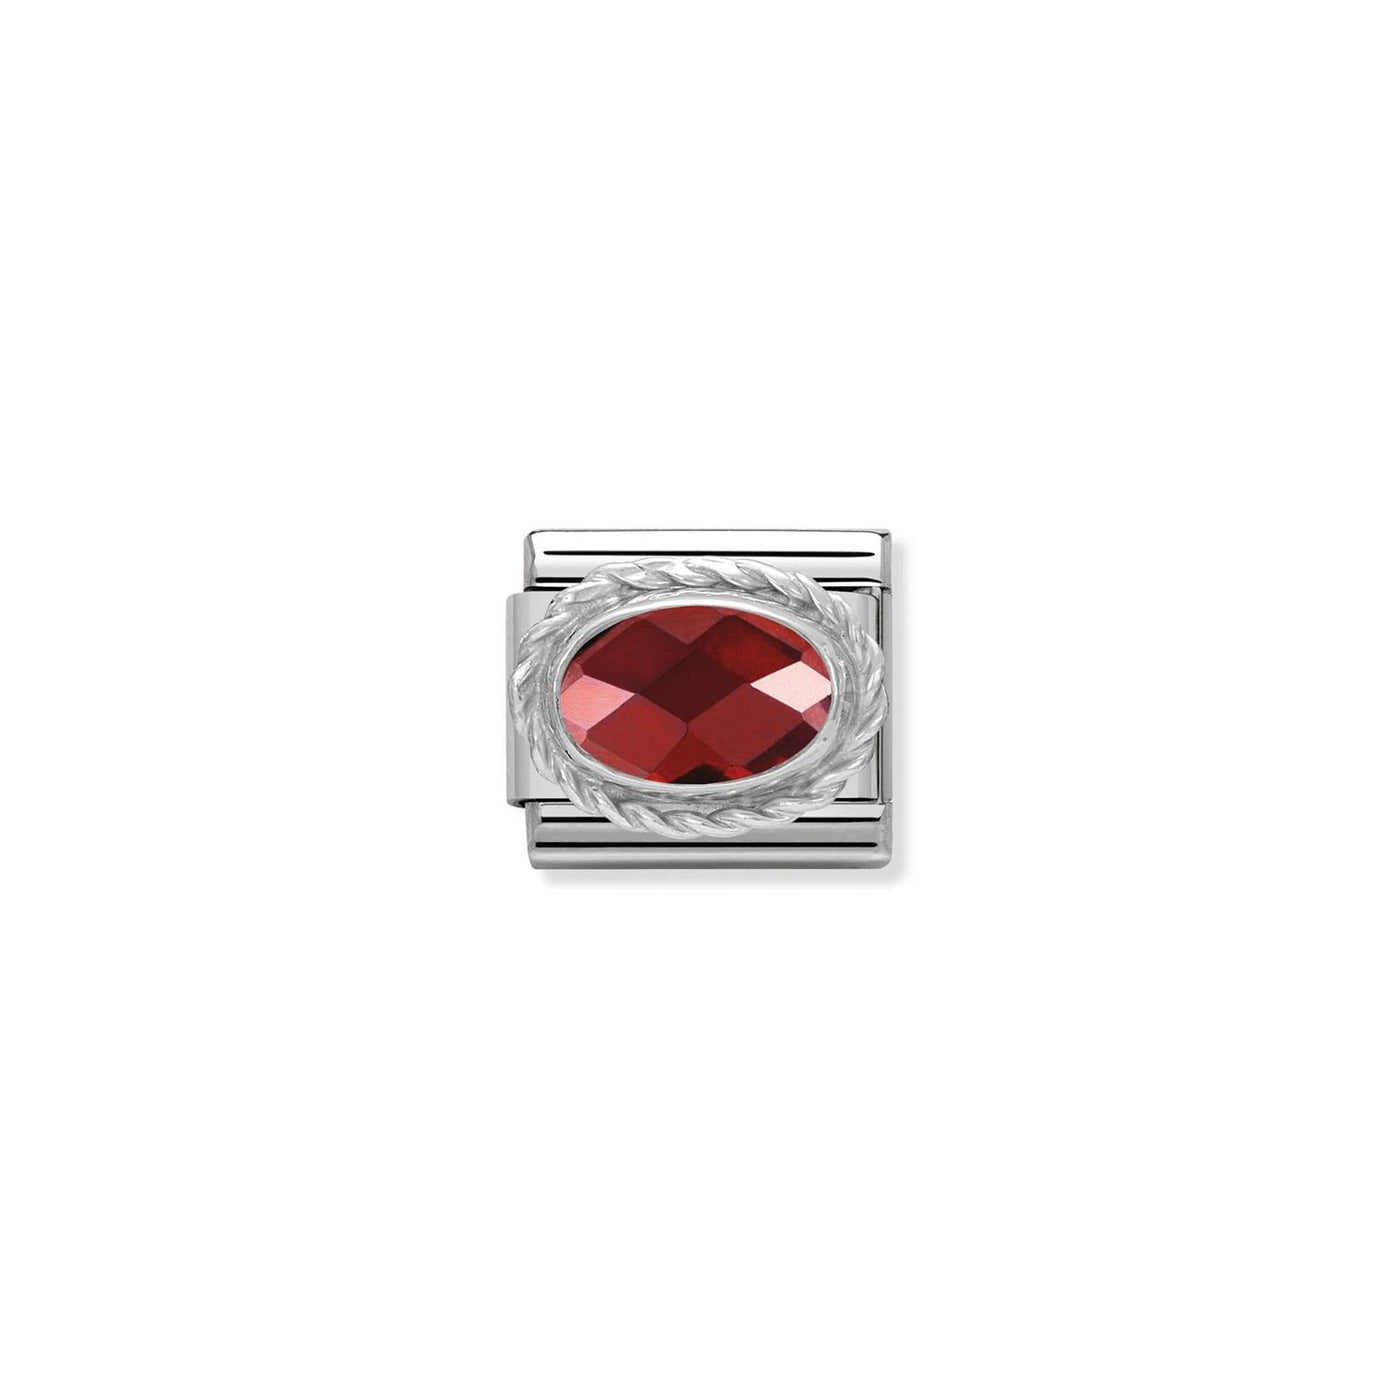 Faceted CZ 925 sterling silver setting and CZ Red